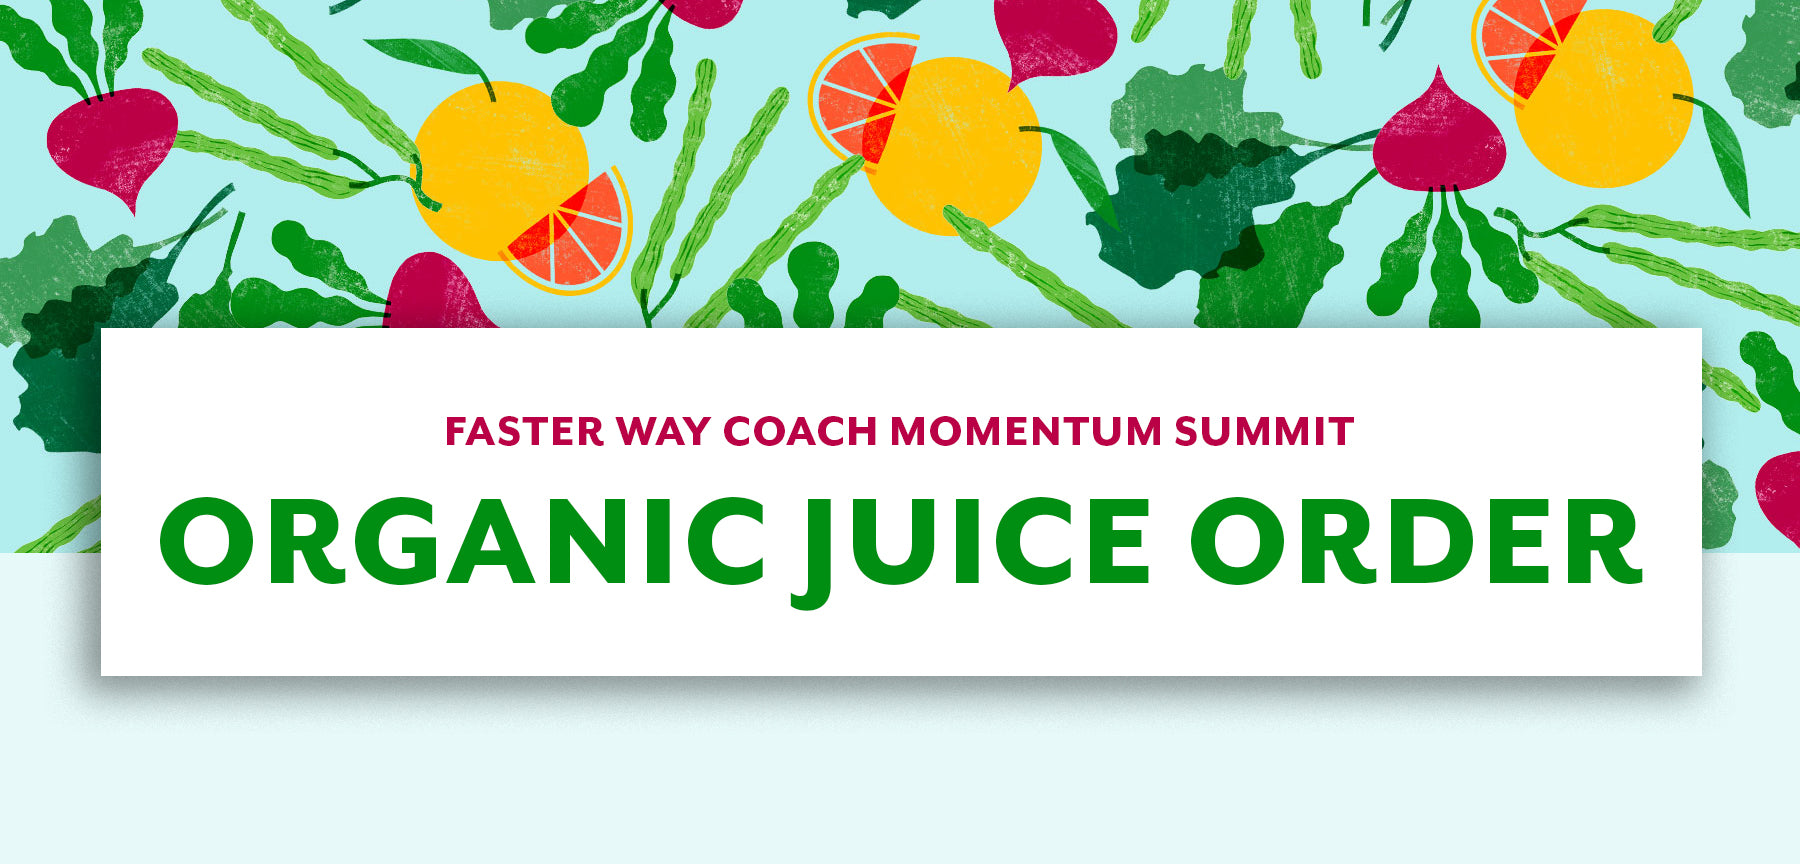 Pre order organic juices to enjoy during the FASTer Way Coach Momentum Summit in Tampa!